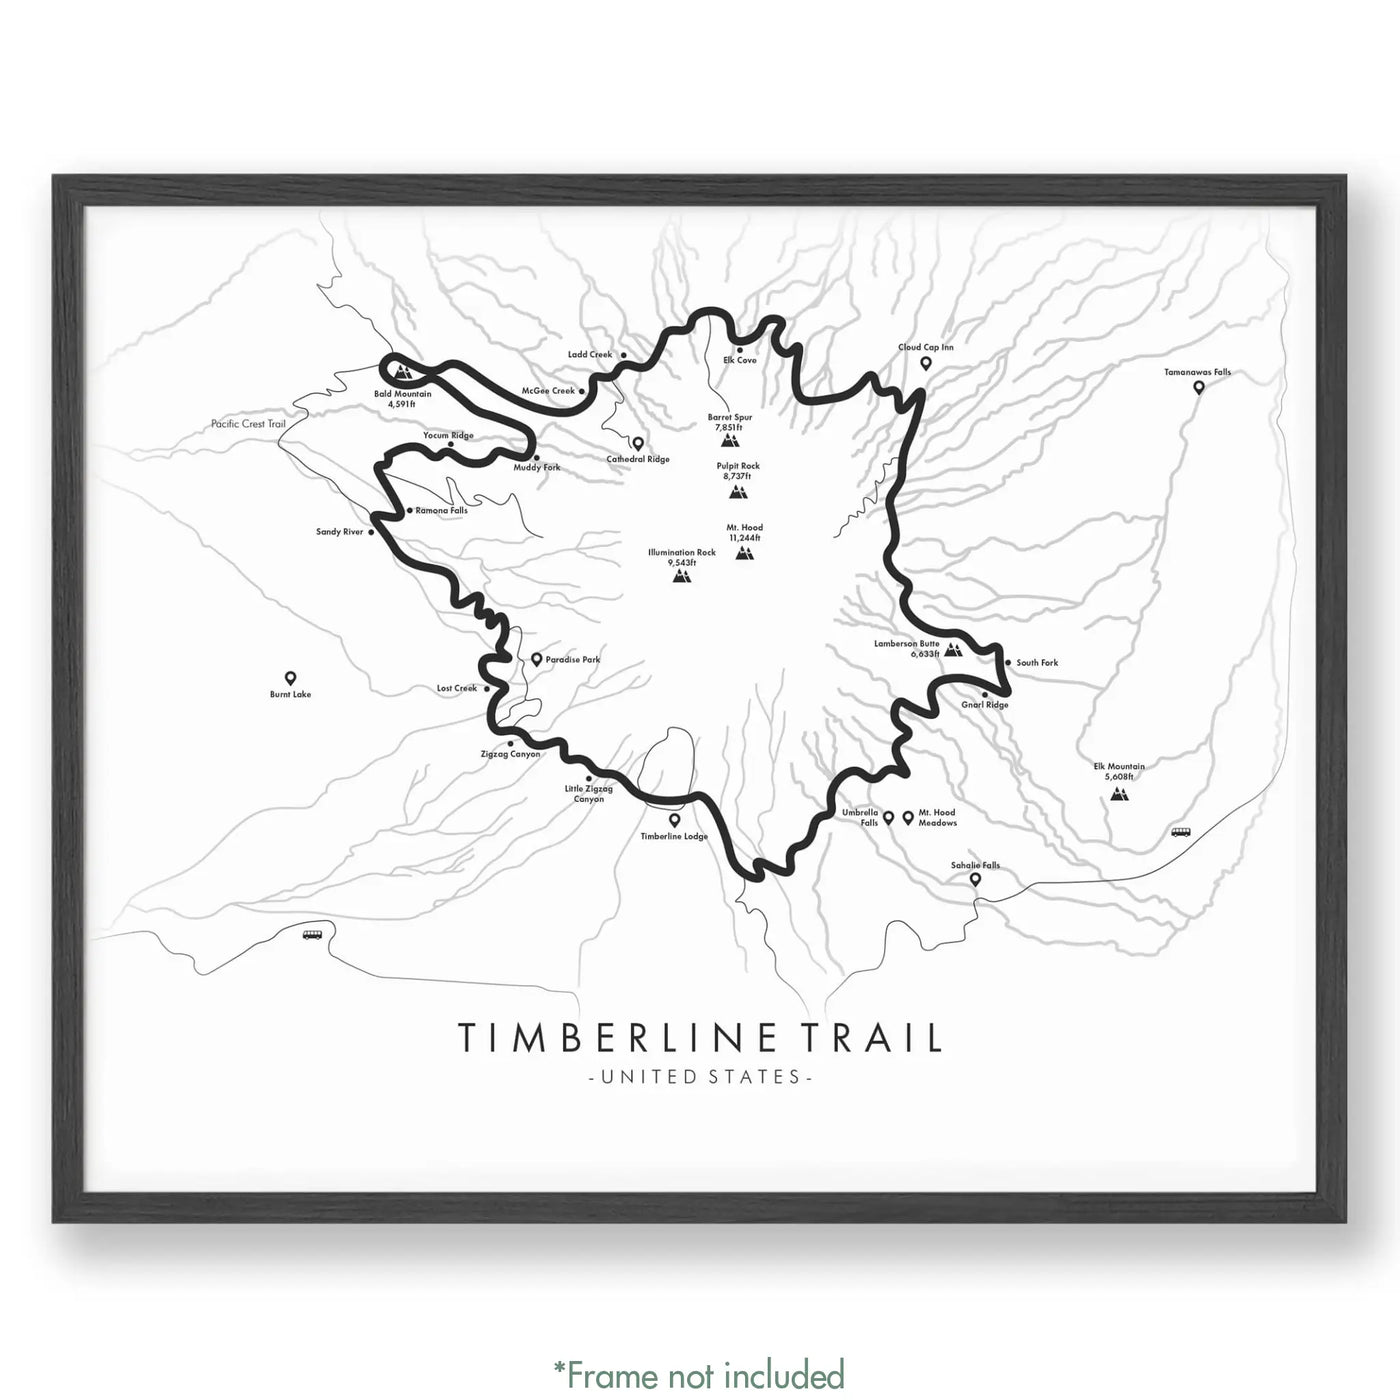 Trail Poster of Timberline Trail - White